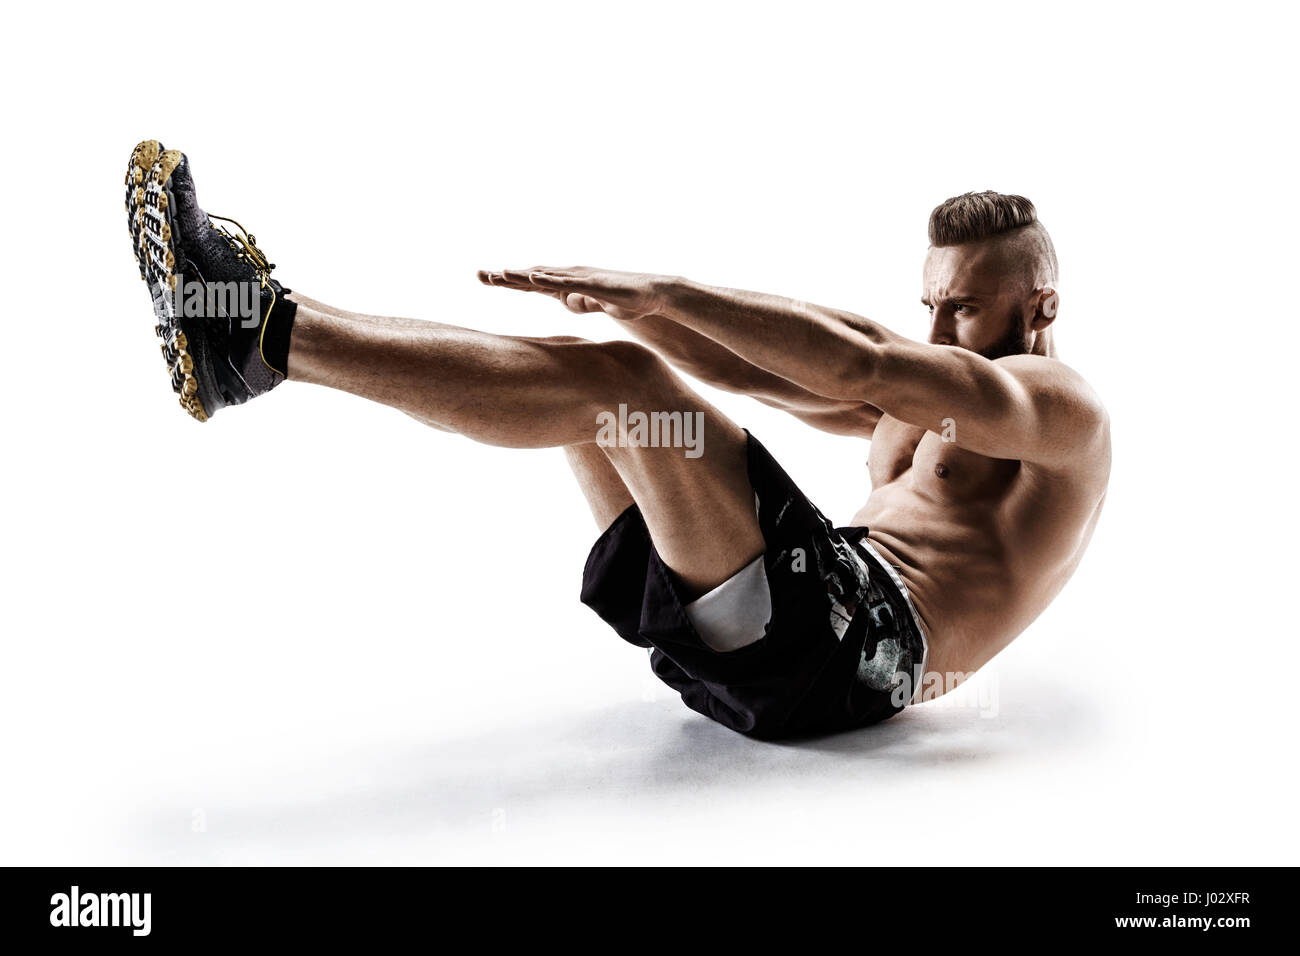 Handsome young man doing fitness exercise. Photo of muscular man in silhouette on white background.  Fitness and healthy lifestyle concept Stock Photo